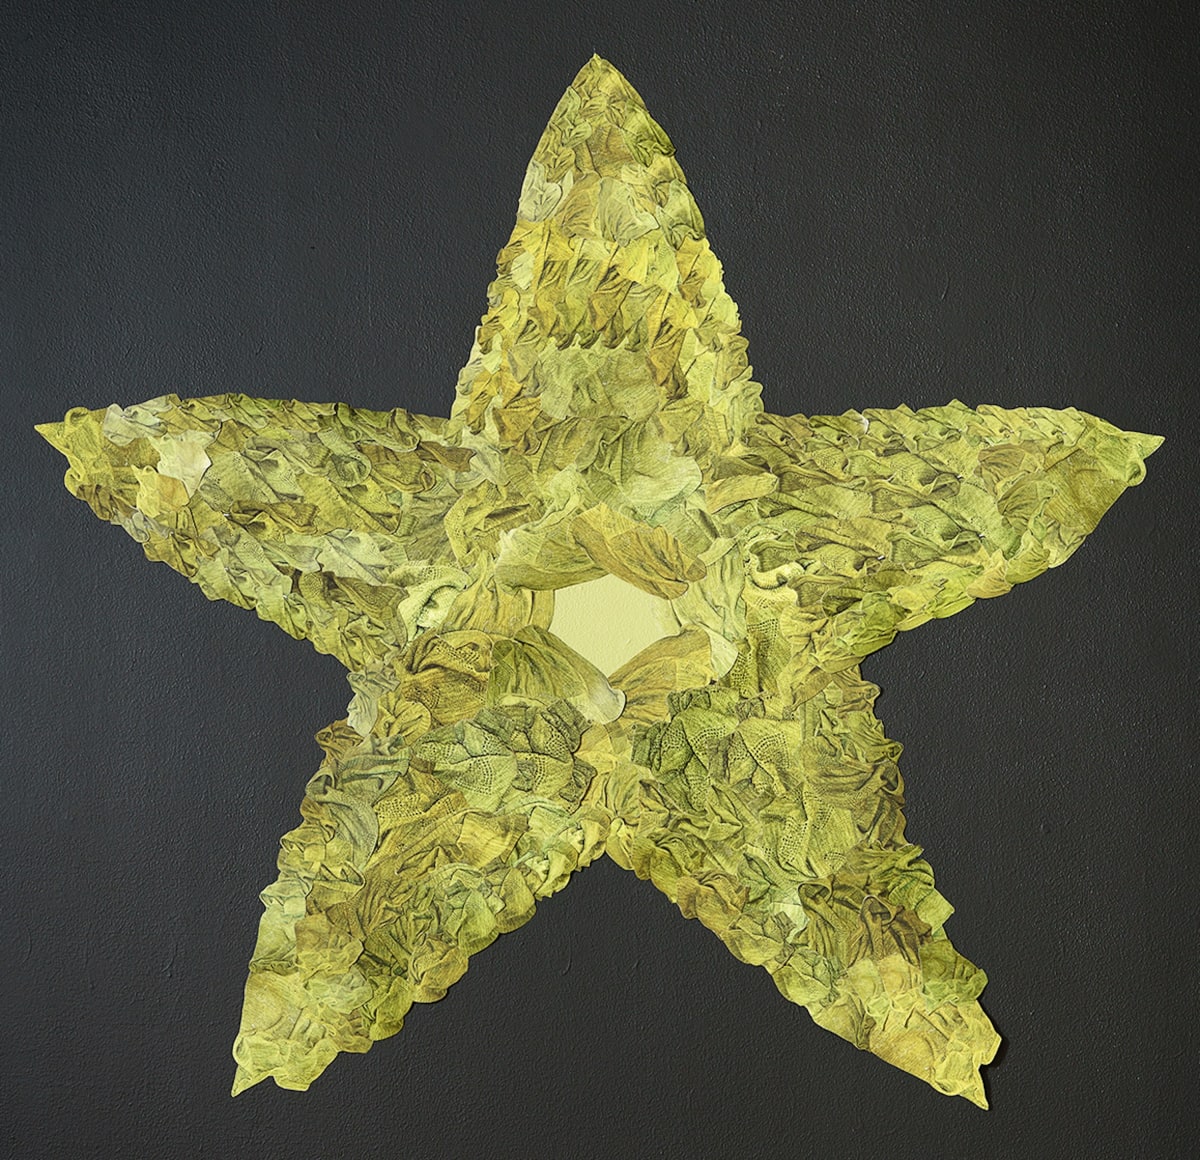 Star (daughter) by Mira Burack  Image: Star (daughter), 2019, Photography collage (photographs of baby blanket), paint, wall installation, 60" x 60"